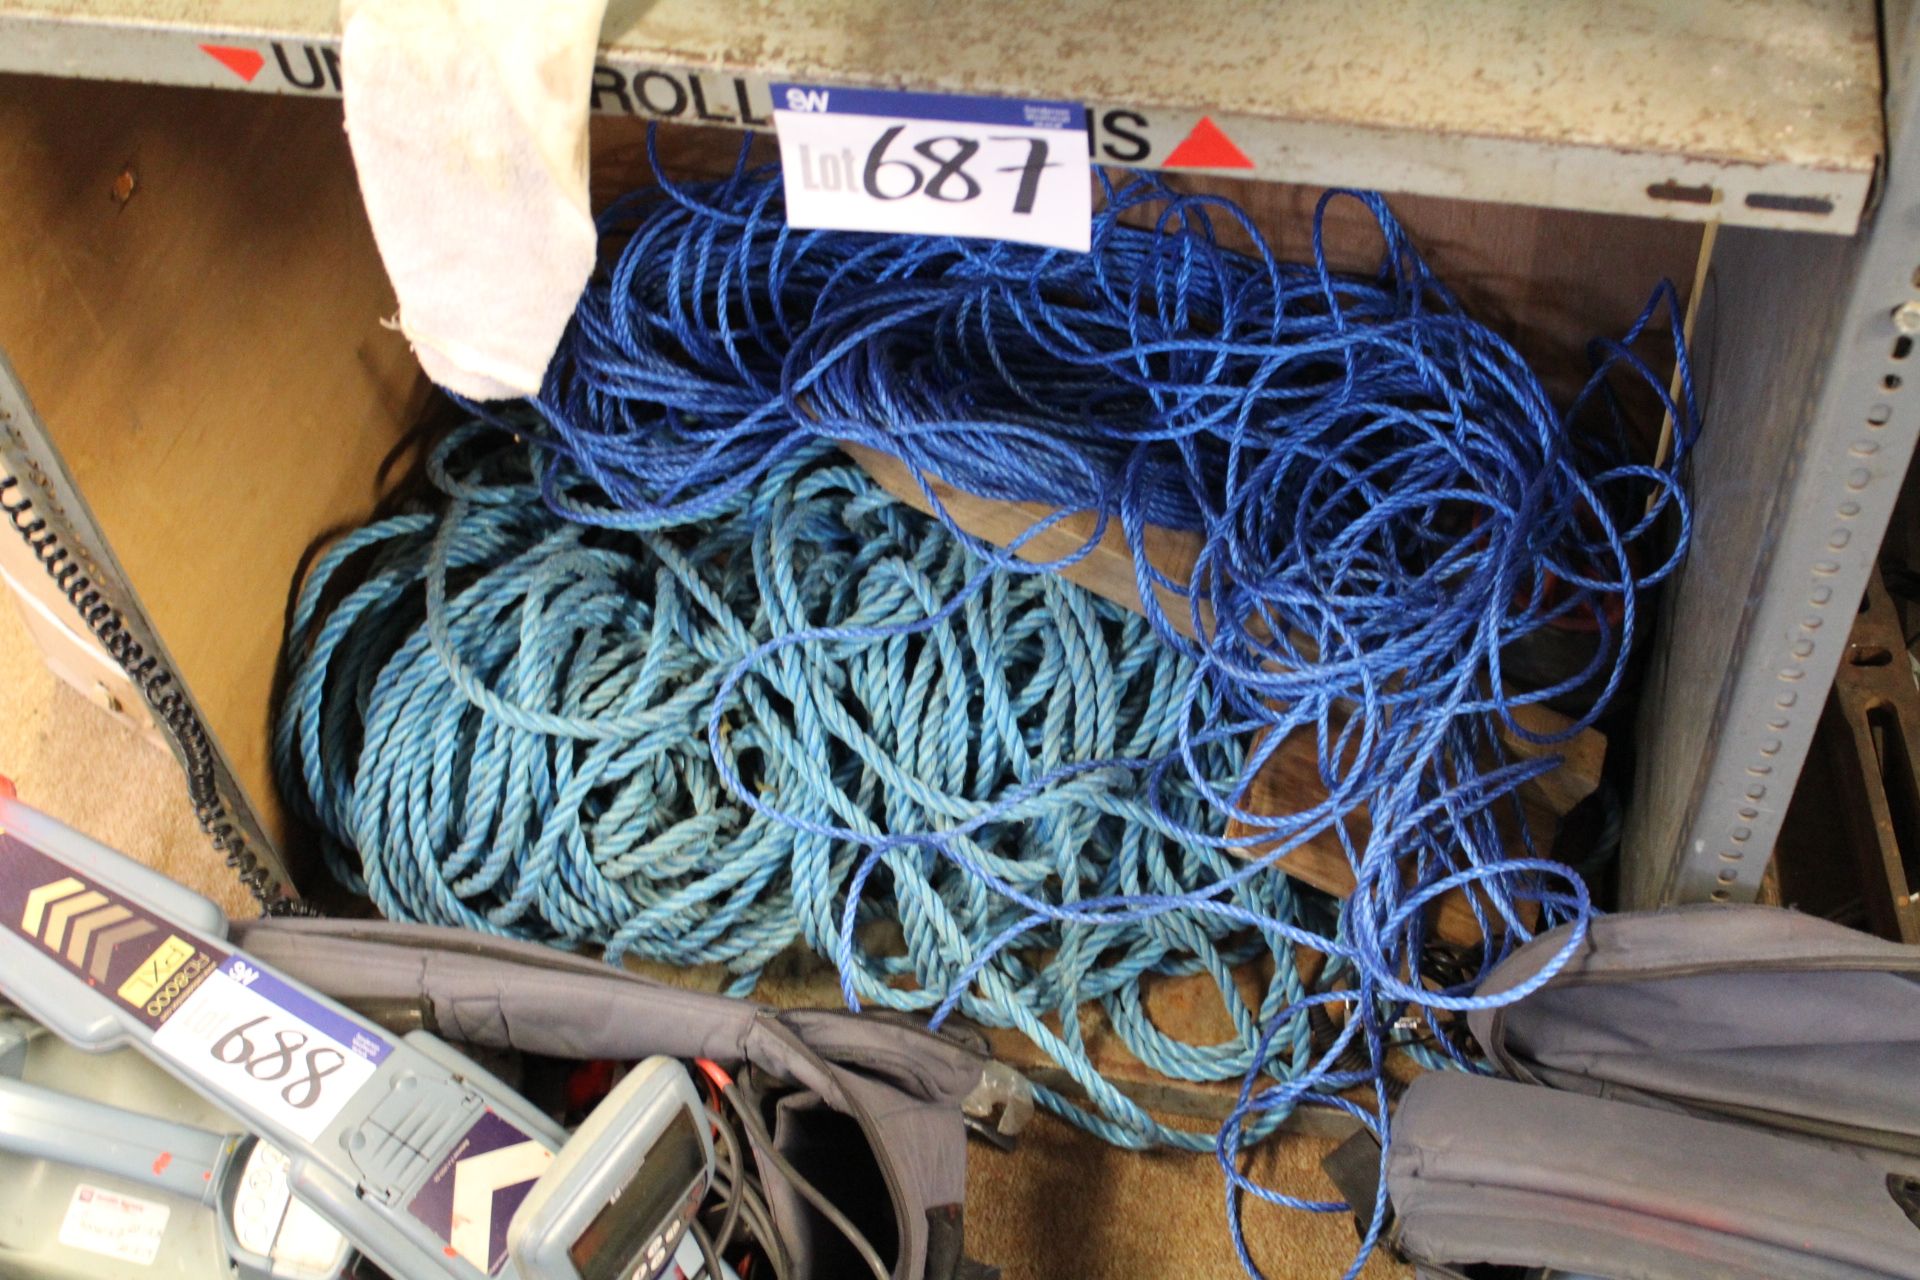 Assorted Rope & String, as set out in one area